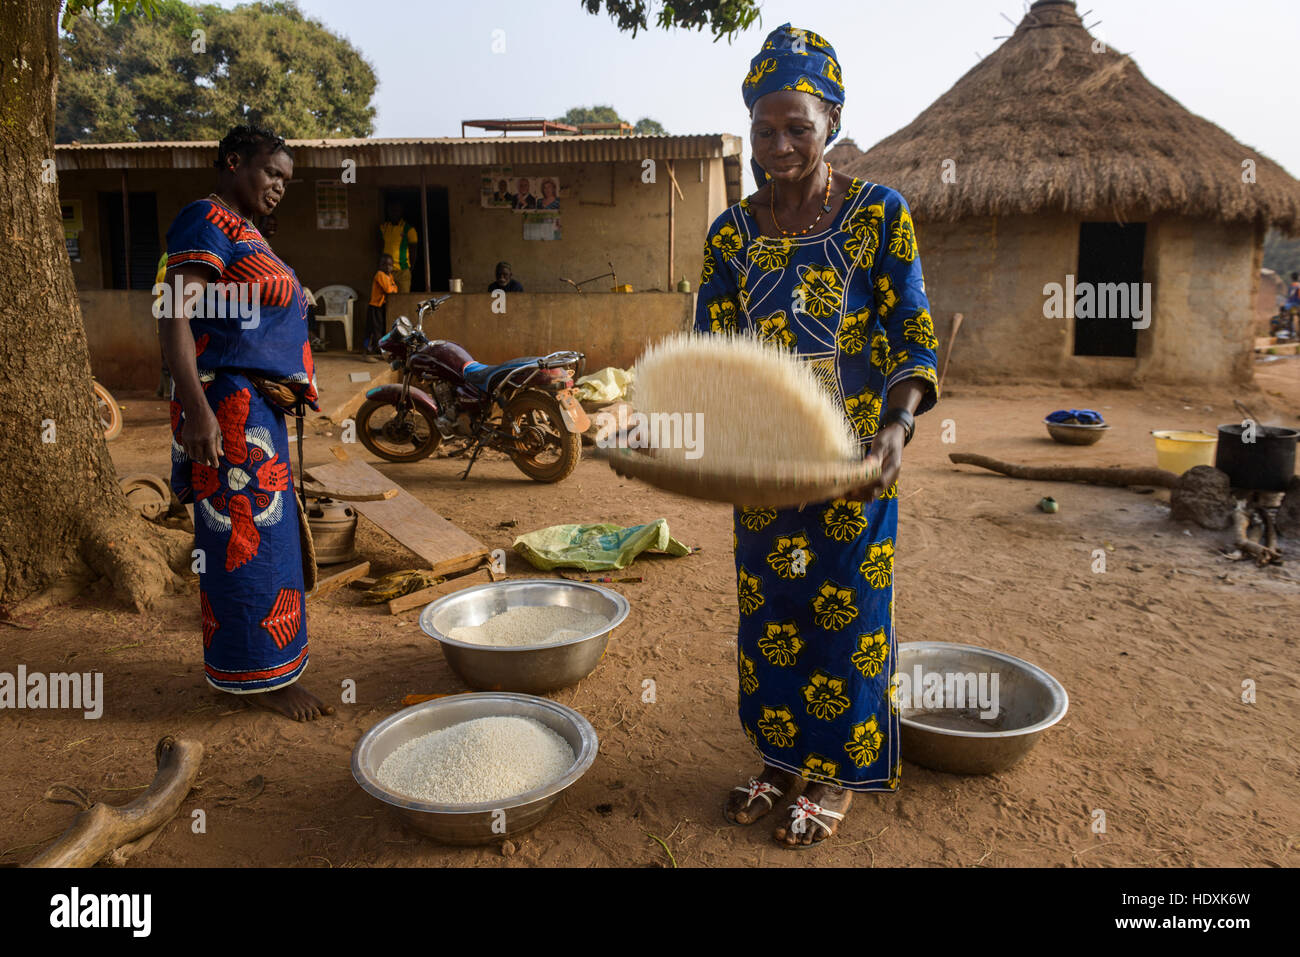 Village life in rural Ivory Coast Stock Photo